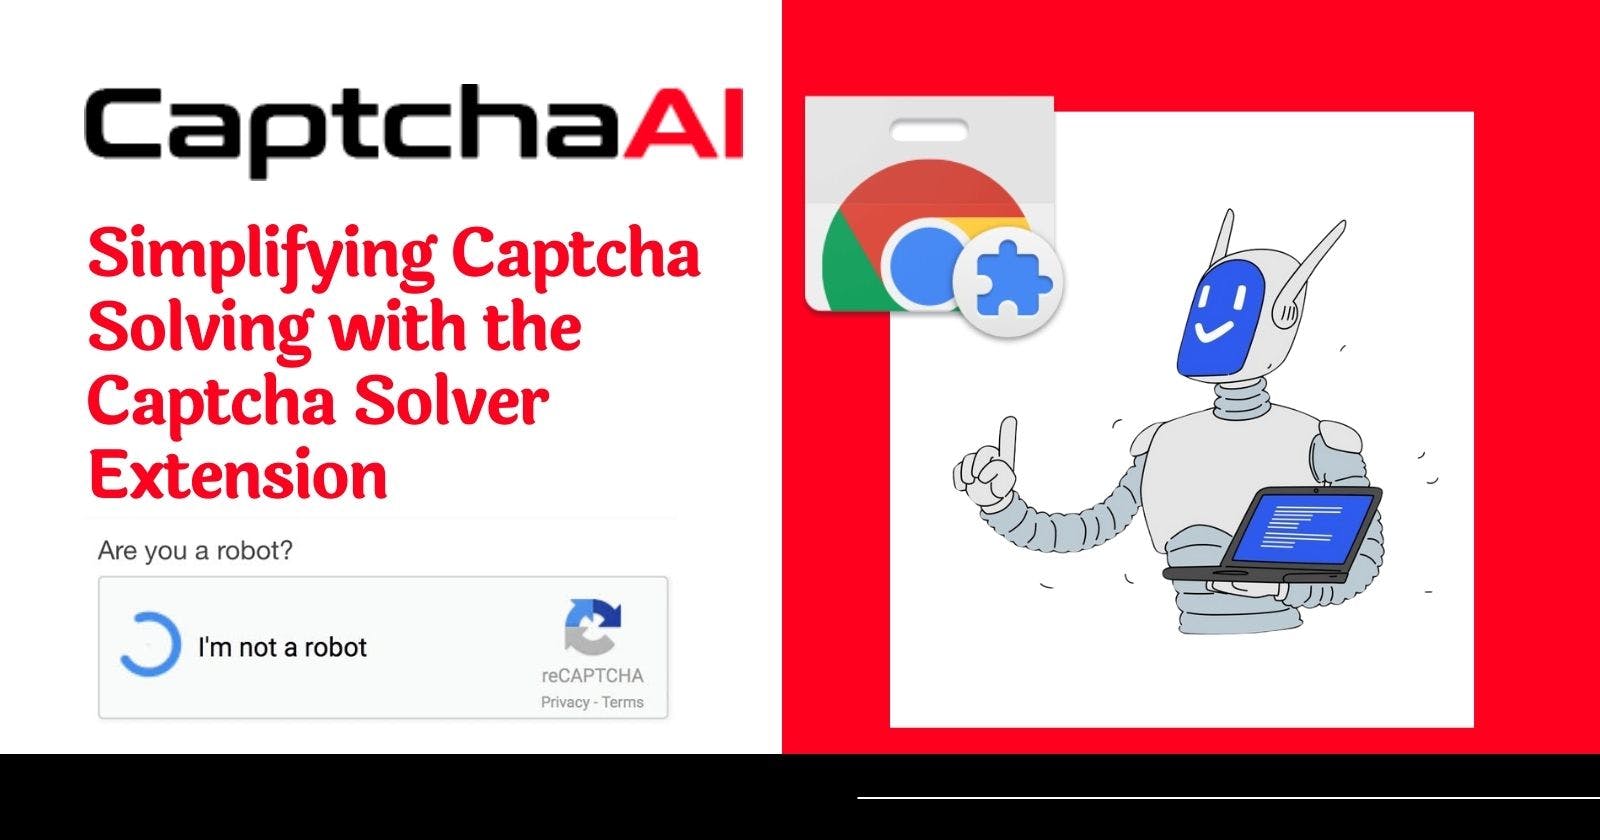 How to Simplify Captcha Solving Using Captcha Solver Extension?